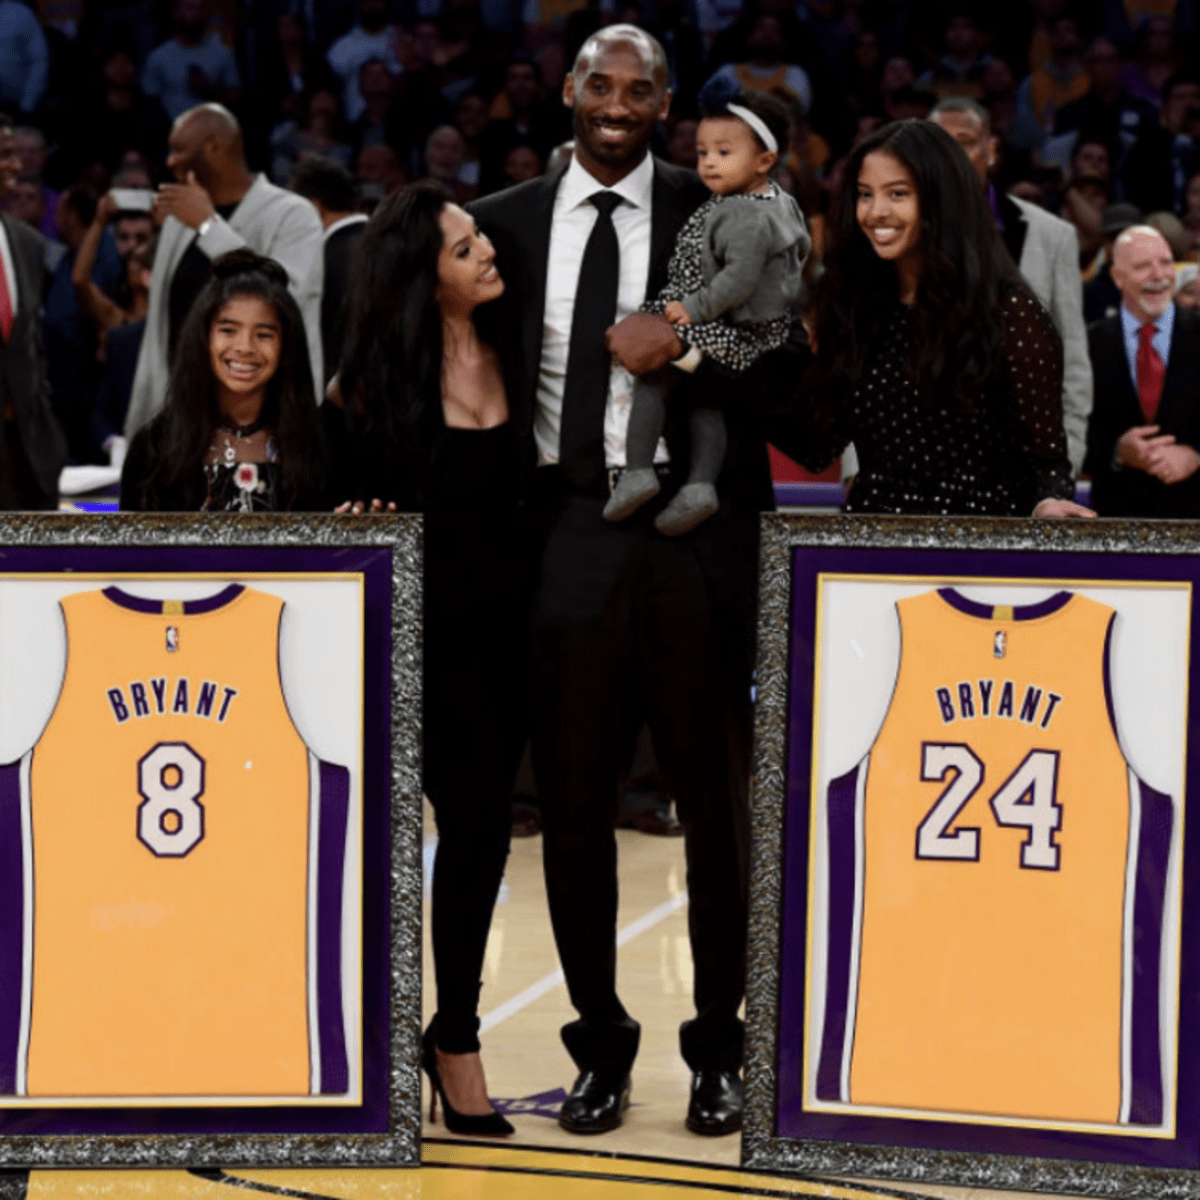 Dish & Swish - These are the NBA players who changed numbers to honor Kobe  Bryant Spencer Dinwiddie(BKN) #8 ➡️ #26 Terrence Ross(ORL) #8 ➡️ # 31  Zhaire Smith(PHI) #8 ➡️ #5